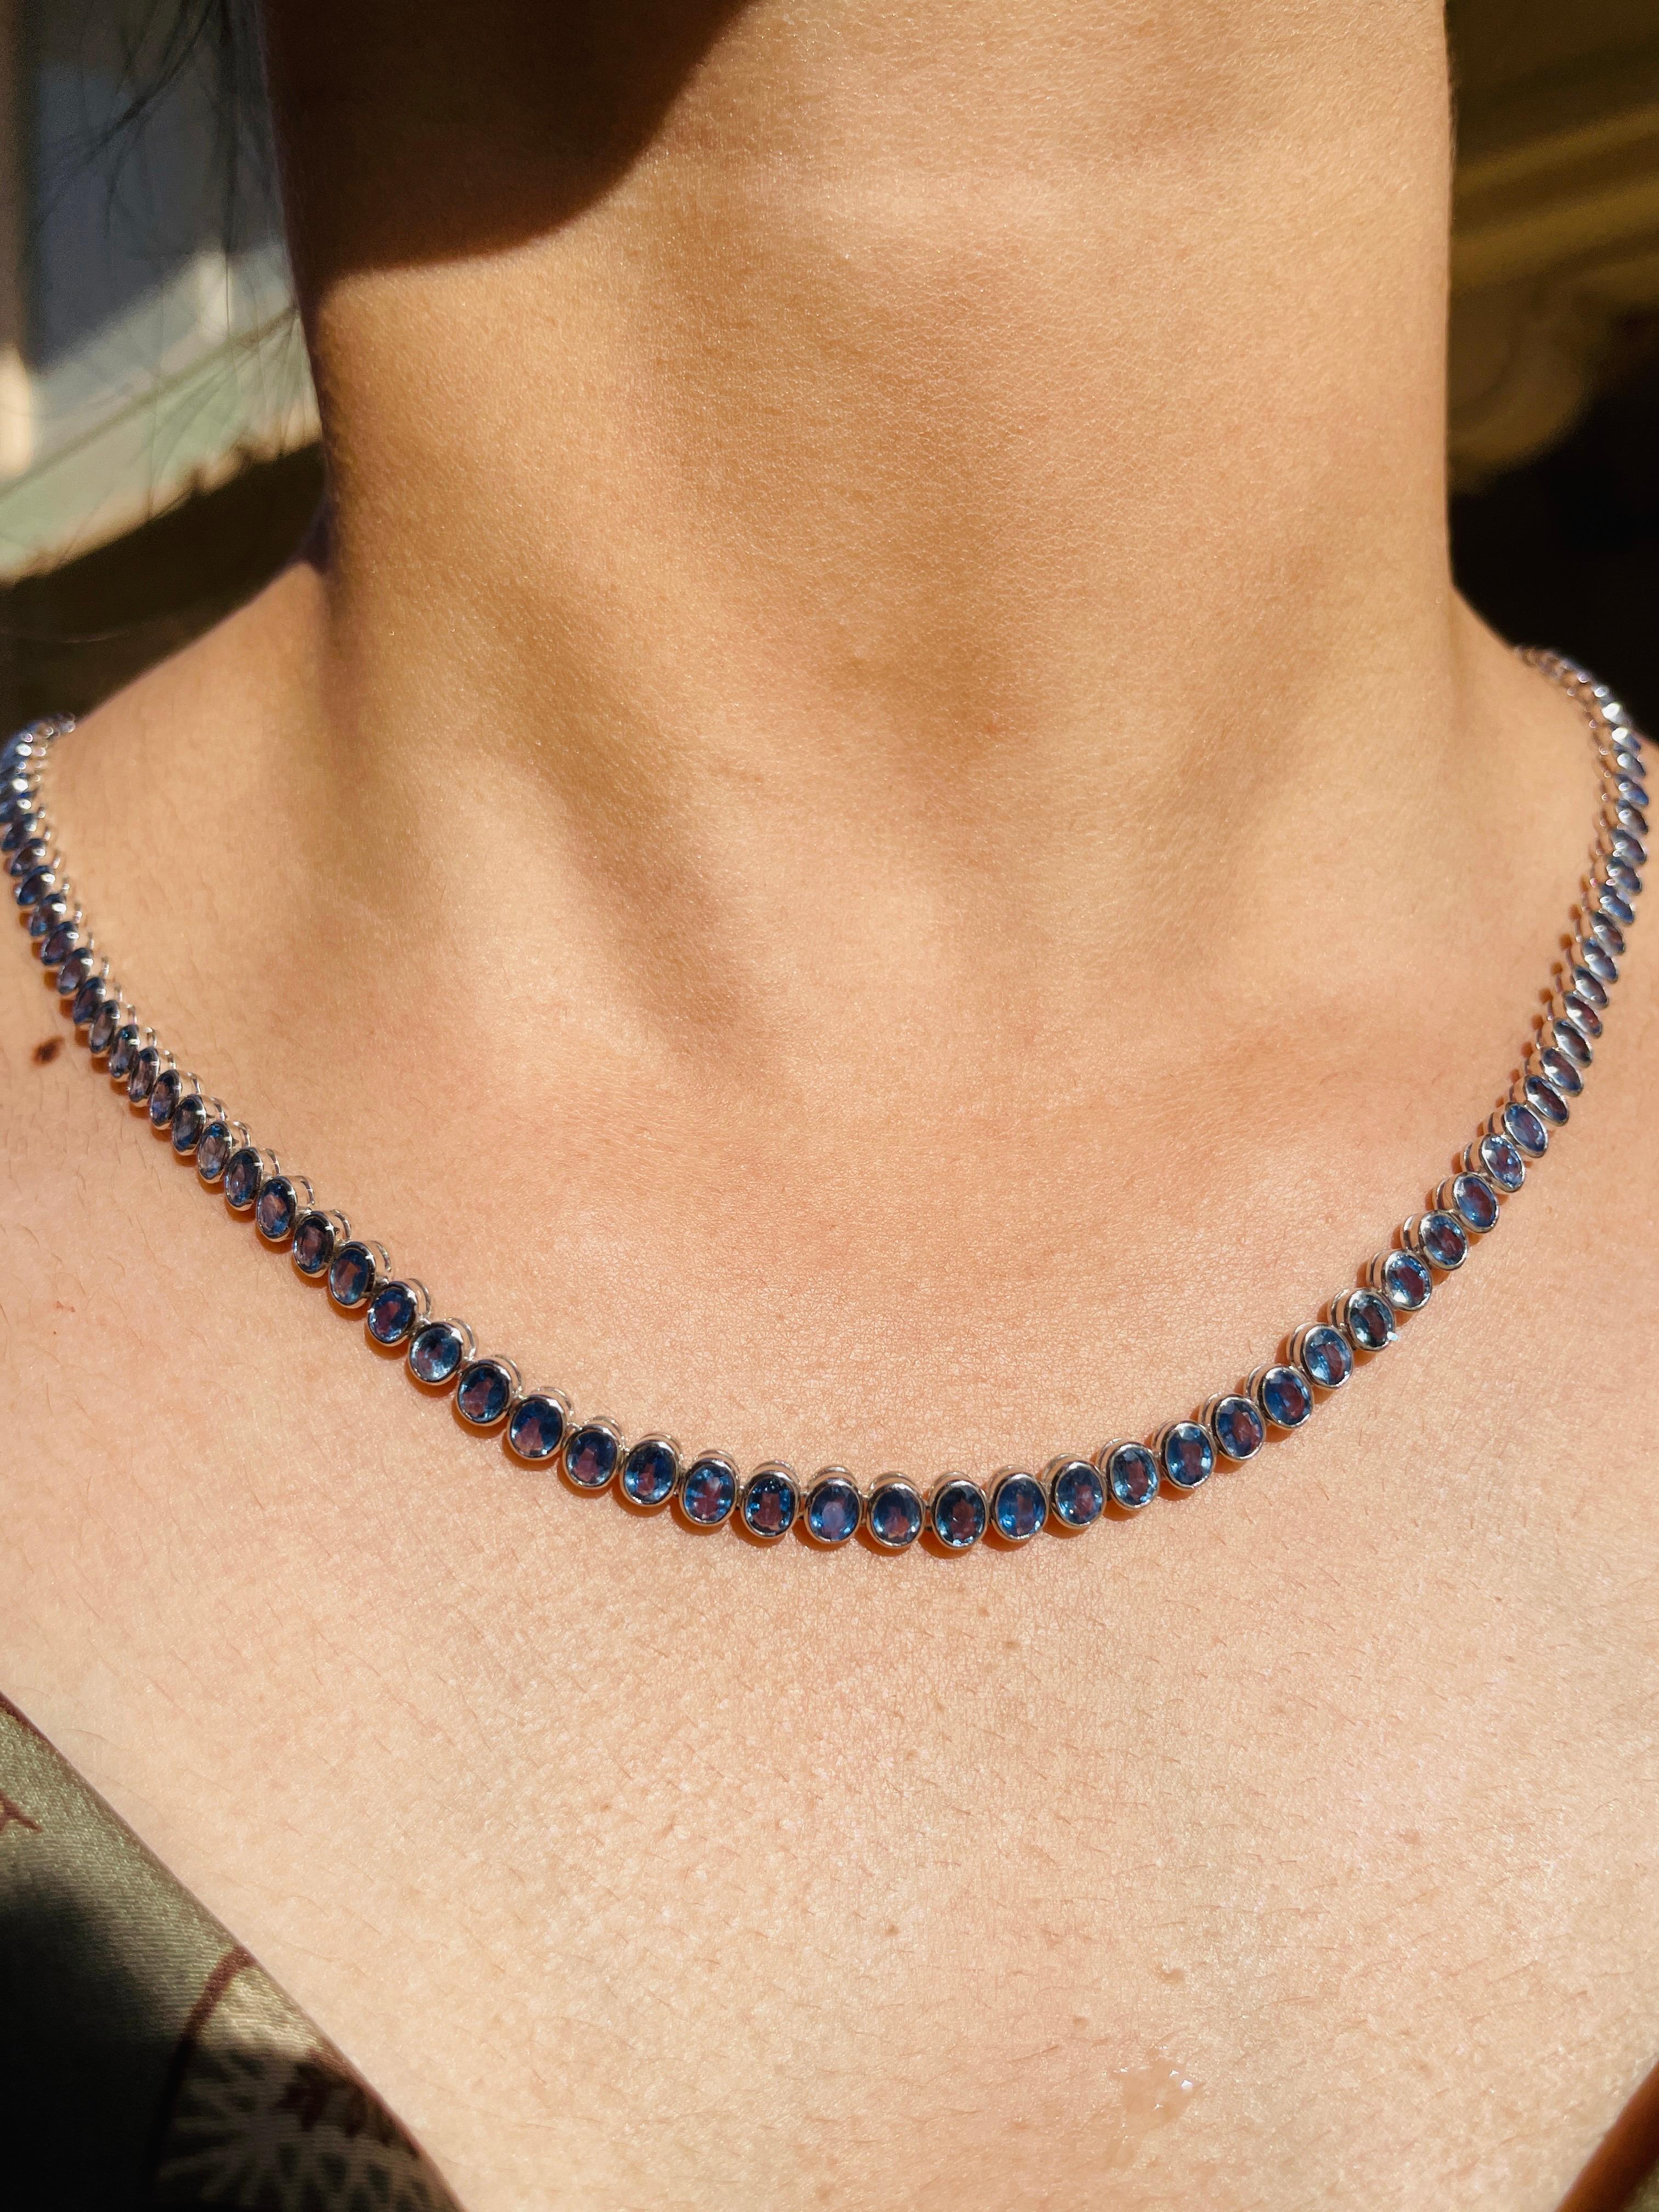 Blue Sapphire Necklace in 18K Gold studded with oval cut sapphire pieces.
Accessorize your look with this elegant blue sapphire beaded necklace. This stunning piece of jewelry instantly elevates a casual look or dressy outfit. Comfortable and easy